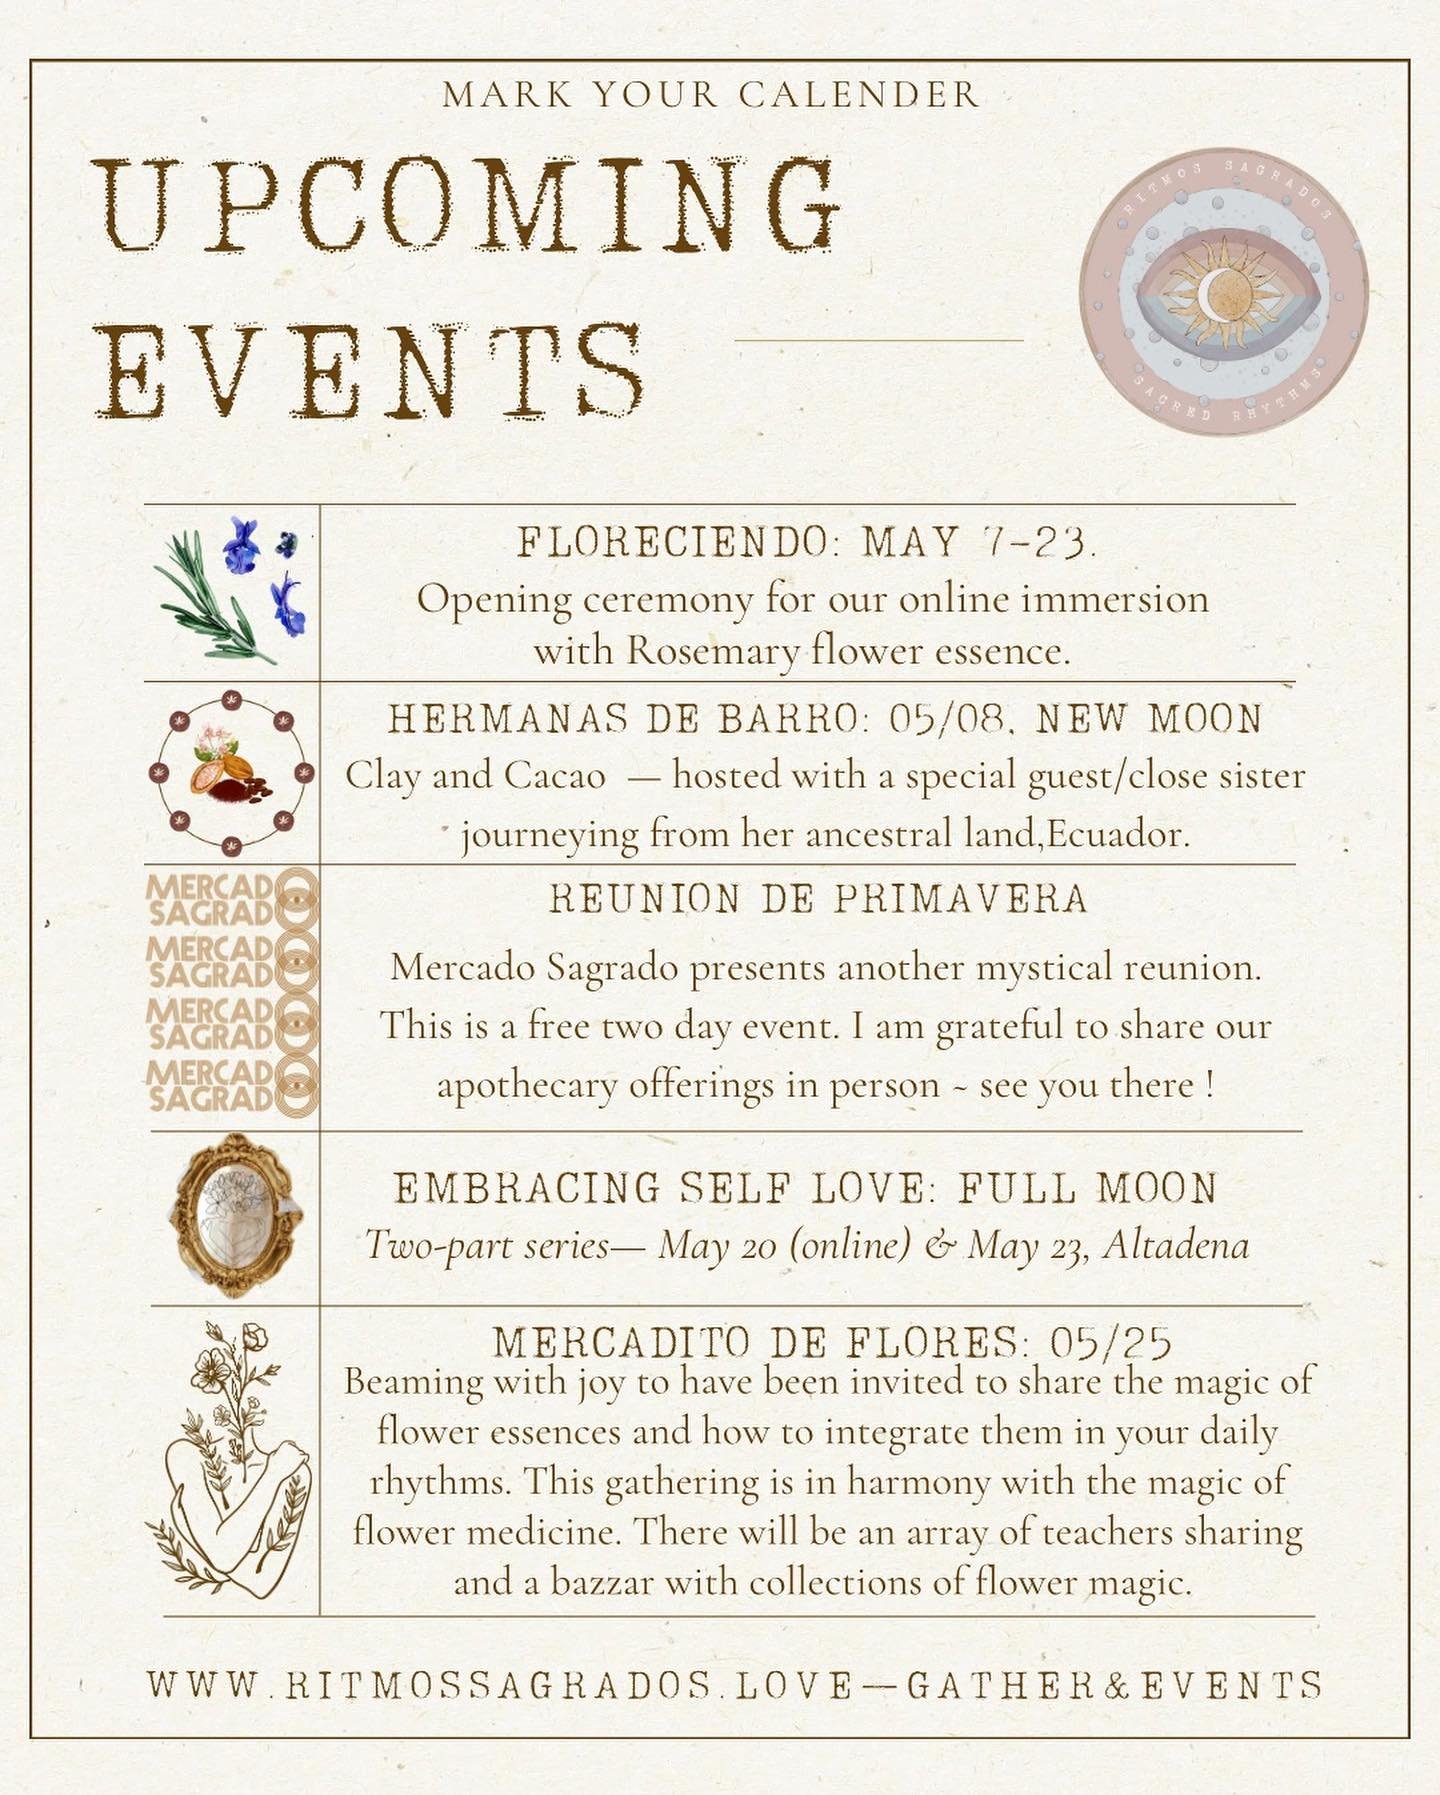 Blessings familia &mdash; an invitation to join me &amp; cocreate magic this spring ✨

My heart is beaming for all of our upcoming events next month. 
All orbiting around flower medicine &mdash; self love &mdash; altars &mdash; cacao &mdash; and clay